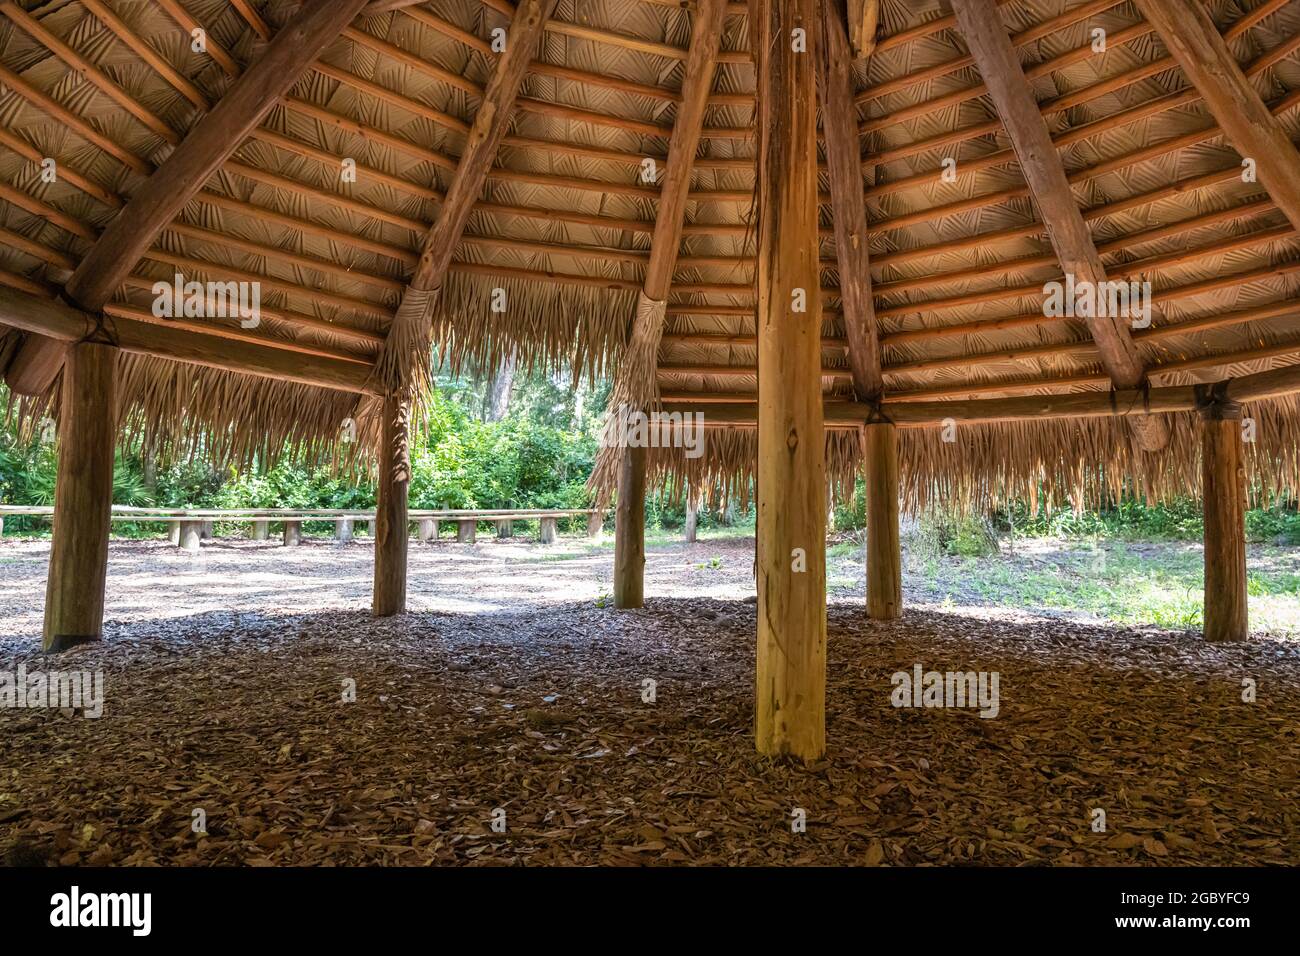 Replica of a Timucuan Indian shelter along the Huguenot Memorial Trail at Fort Caroline National Memorial in the Timucuan Preserve in Jacksonville, FL. Stock Photo